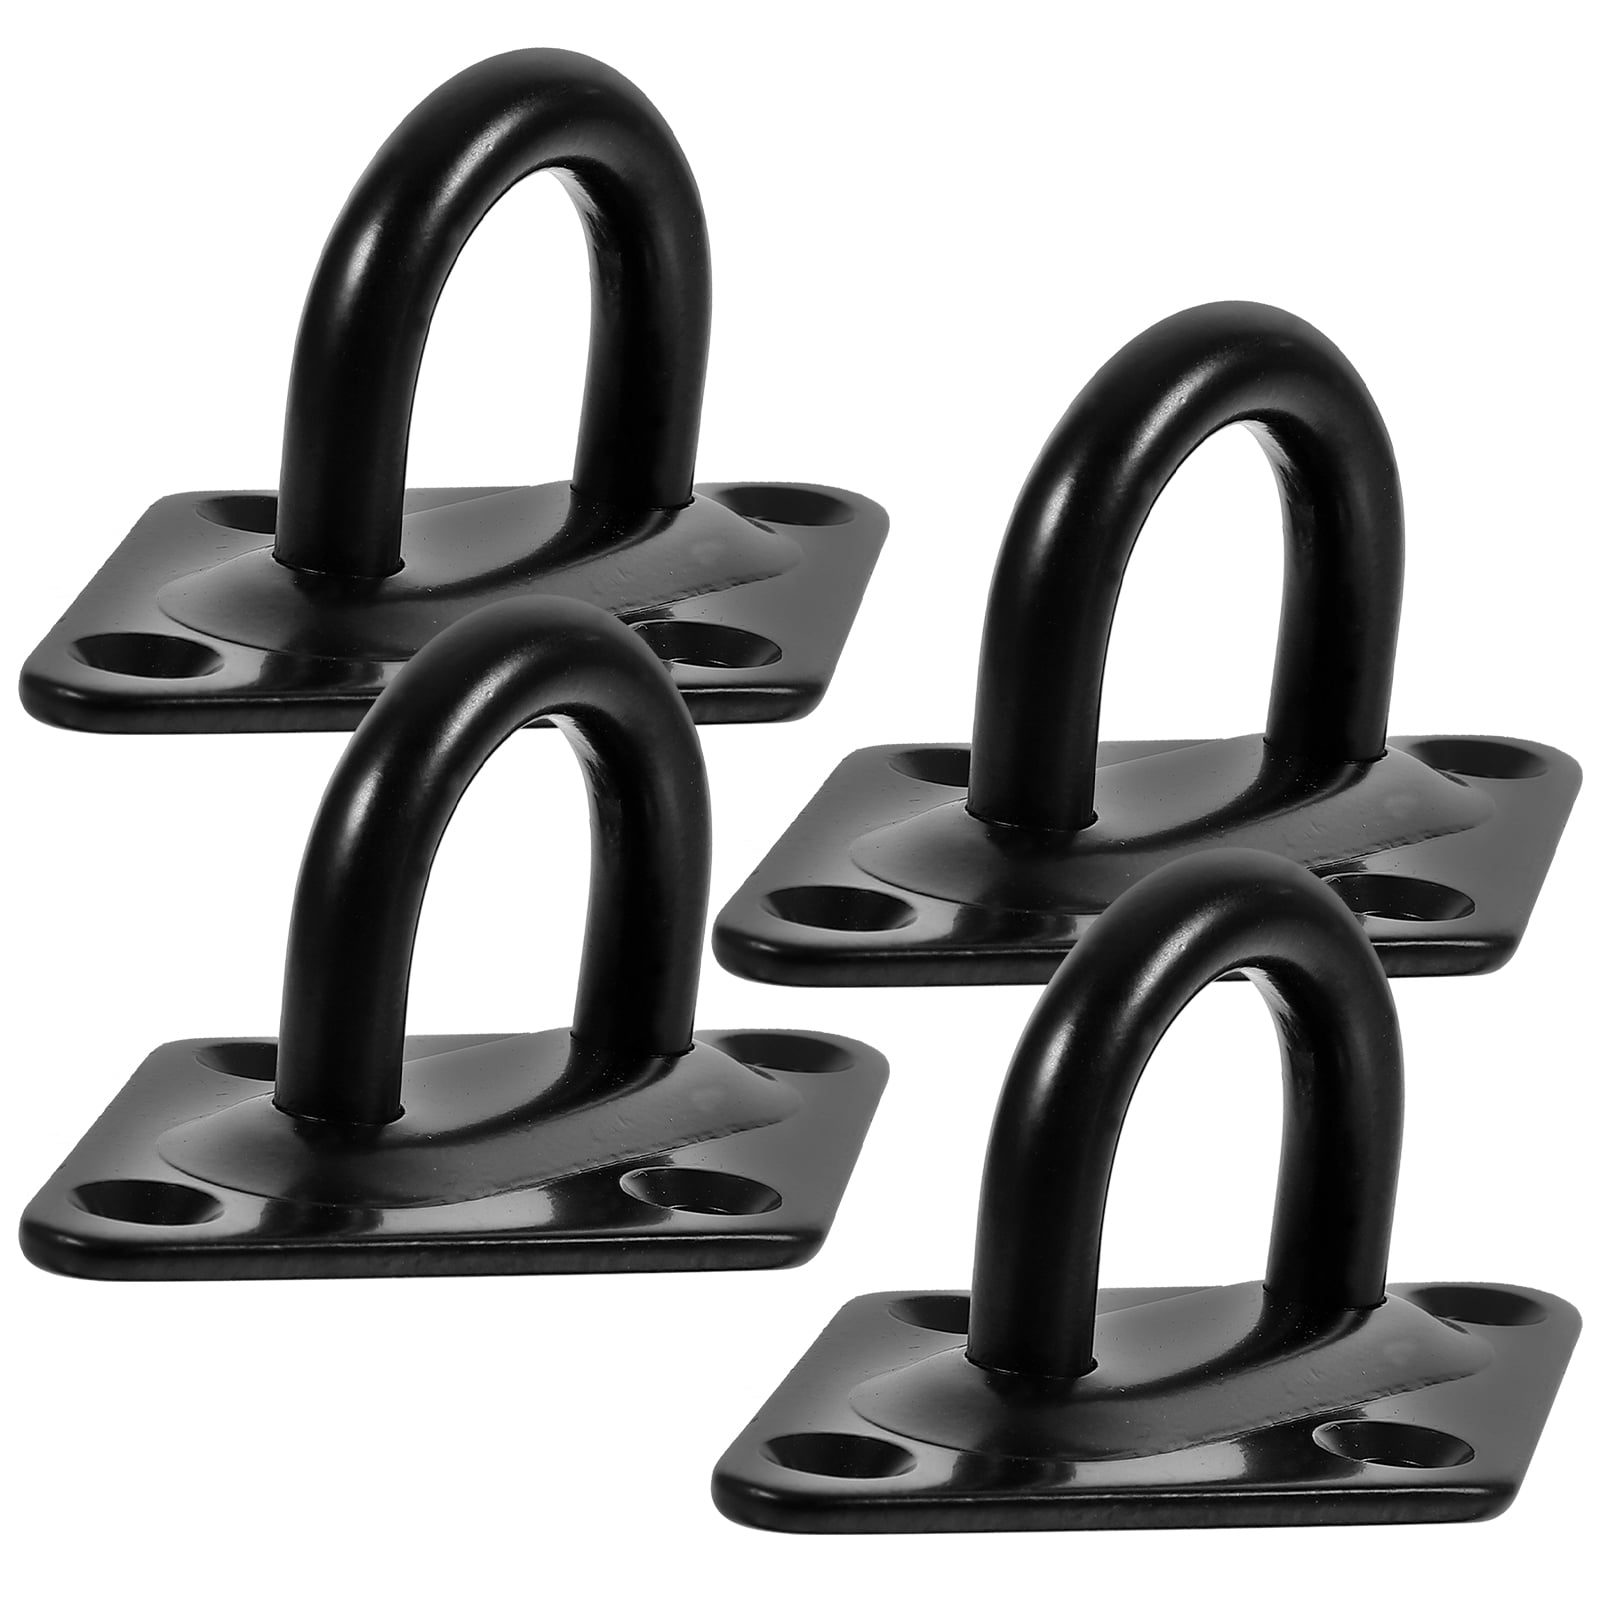 4 Pcs Roof Wall Hook Hooks for Hanging Heavy Duty Stainless Steel